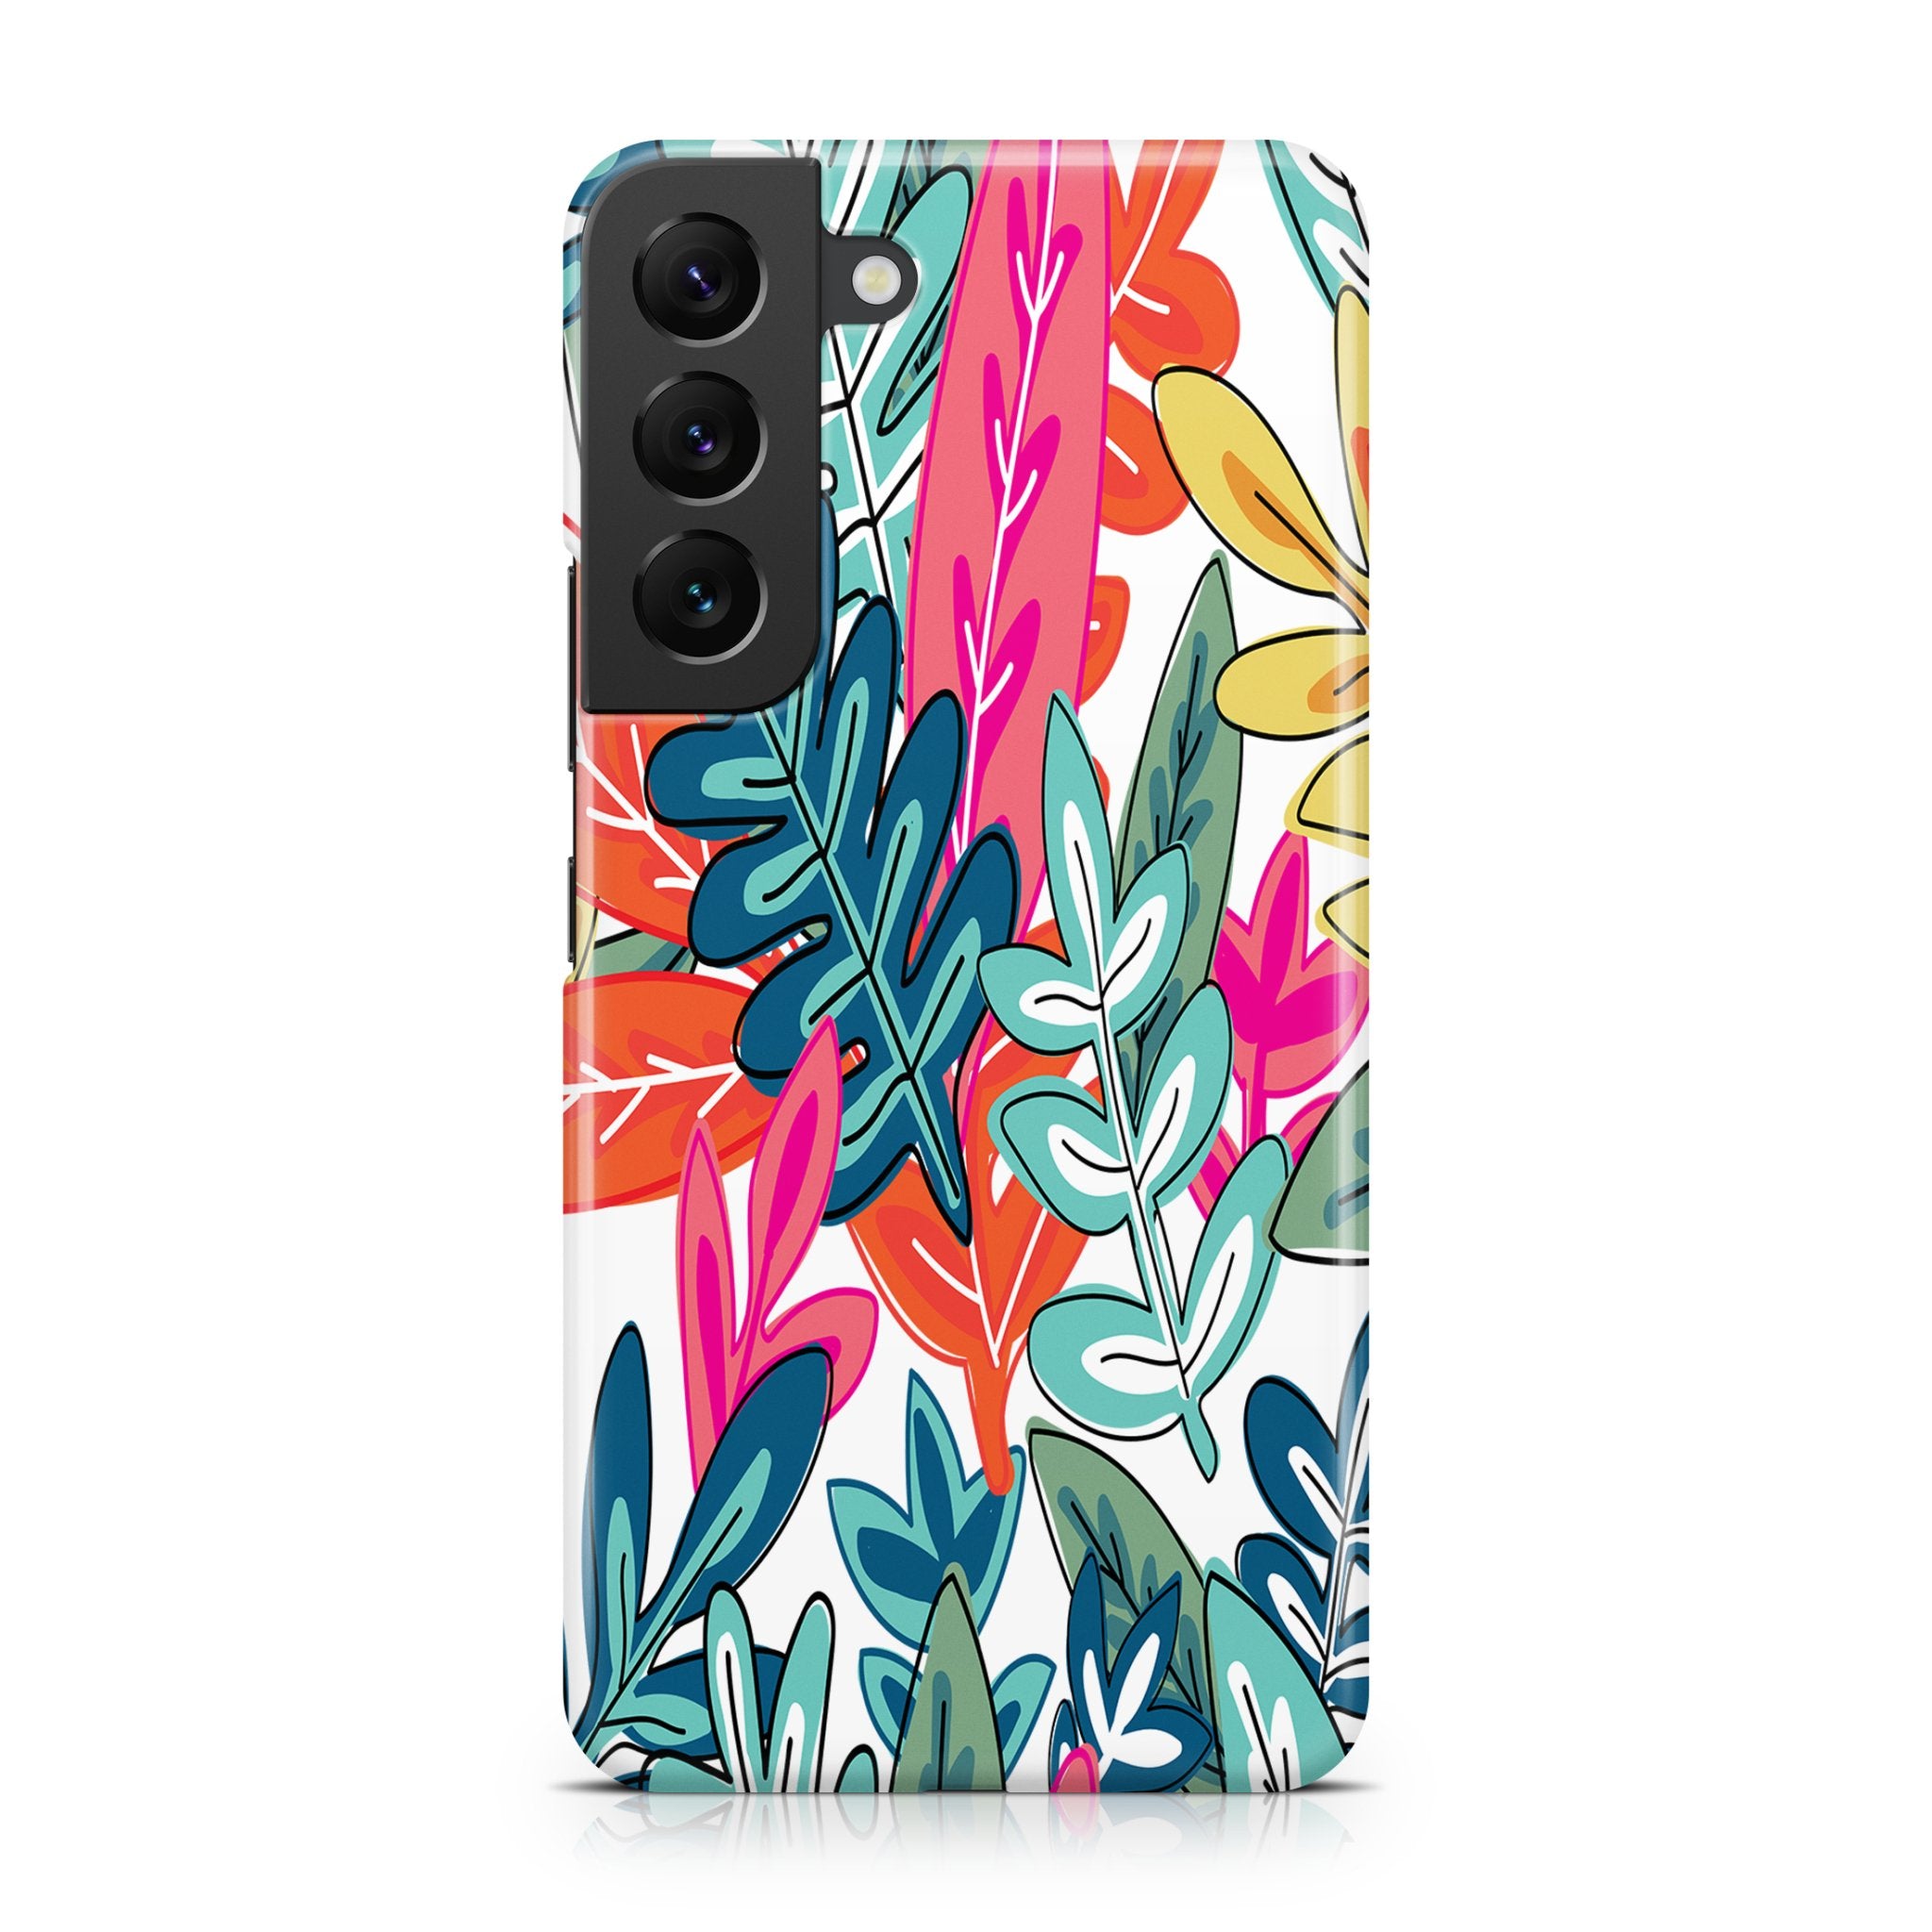 Urban Jungle - Samsung phone case designs by CaseSwagger